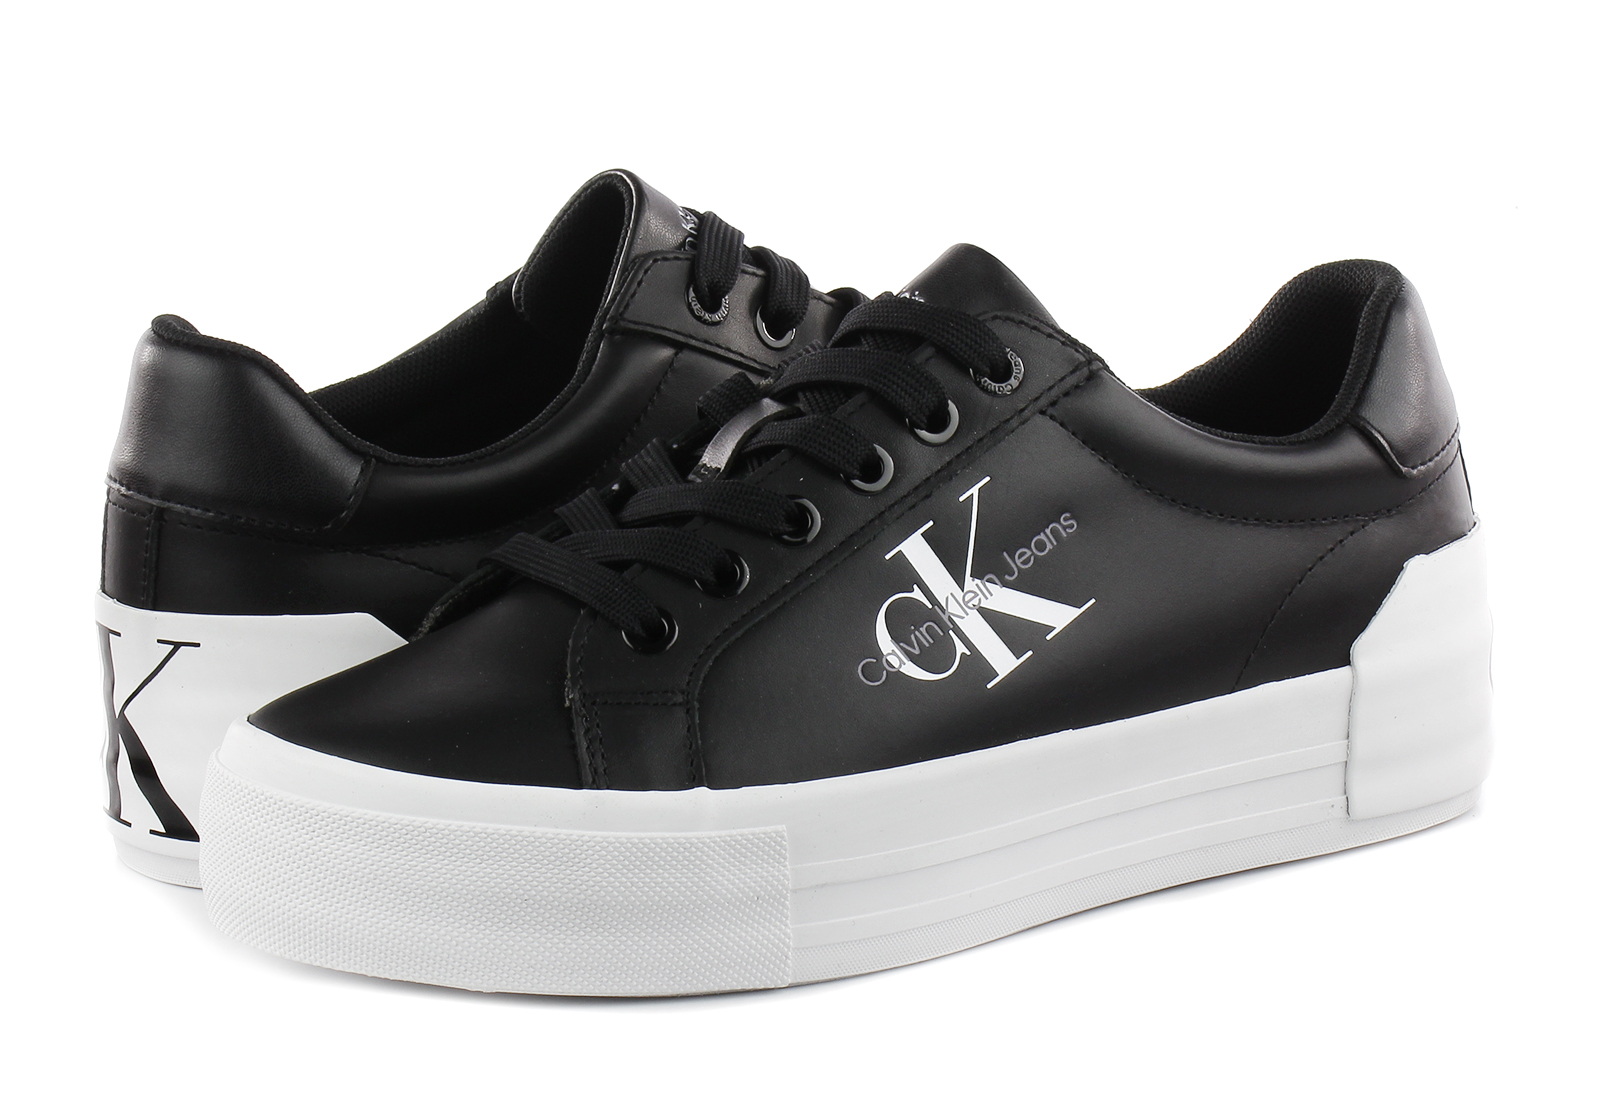 Calvin Klein Jeans Trainers - Renia 7l - YW00821-BDS - Online shop for  sneakers, shoes and boots